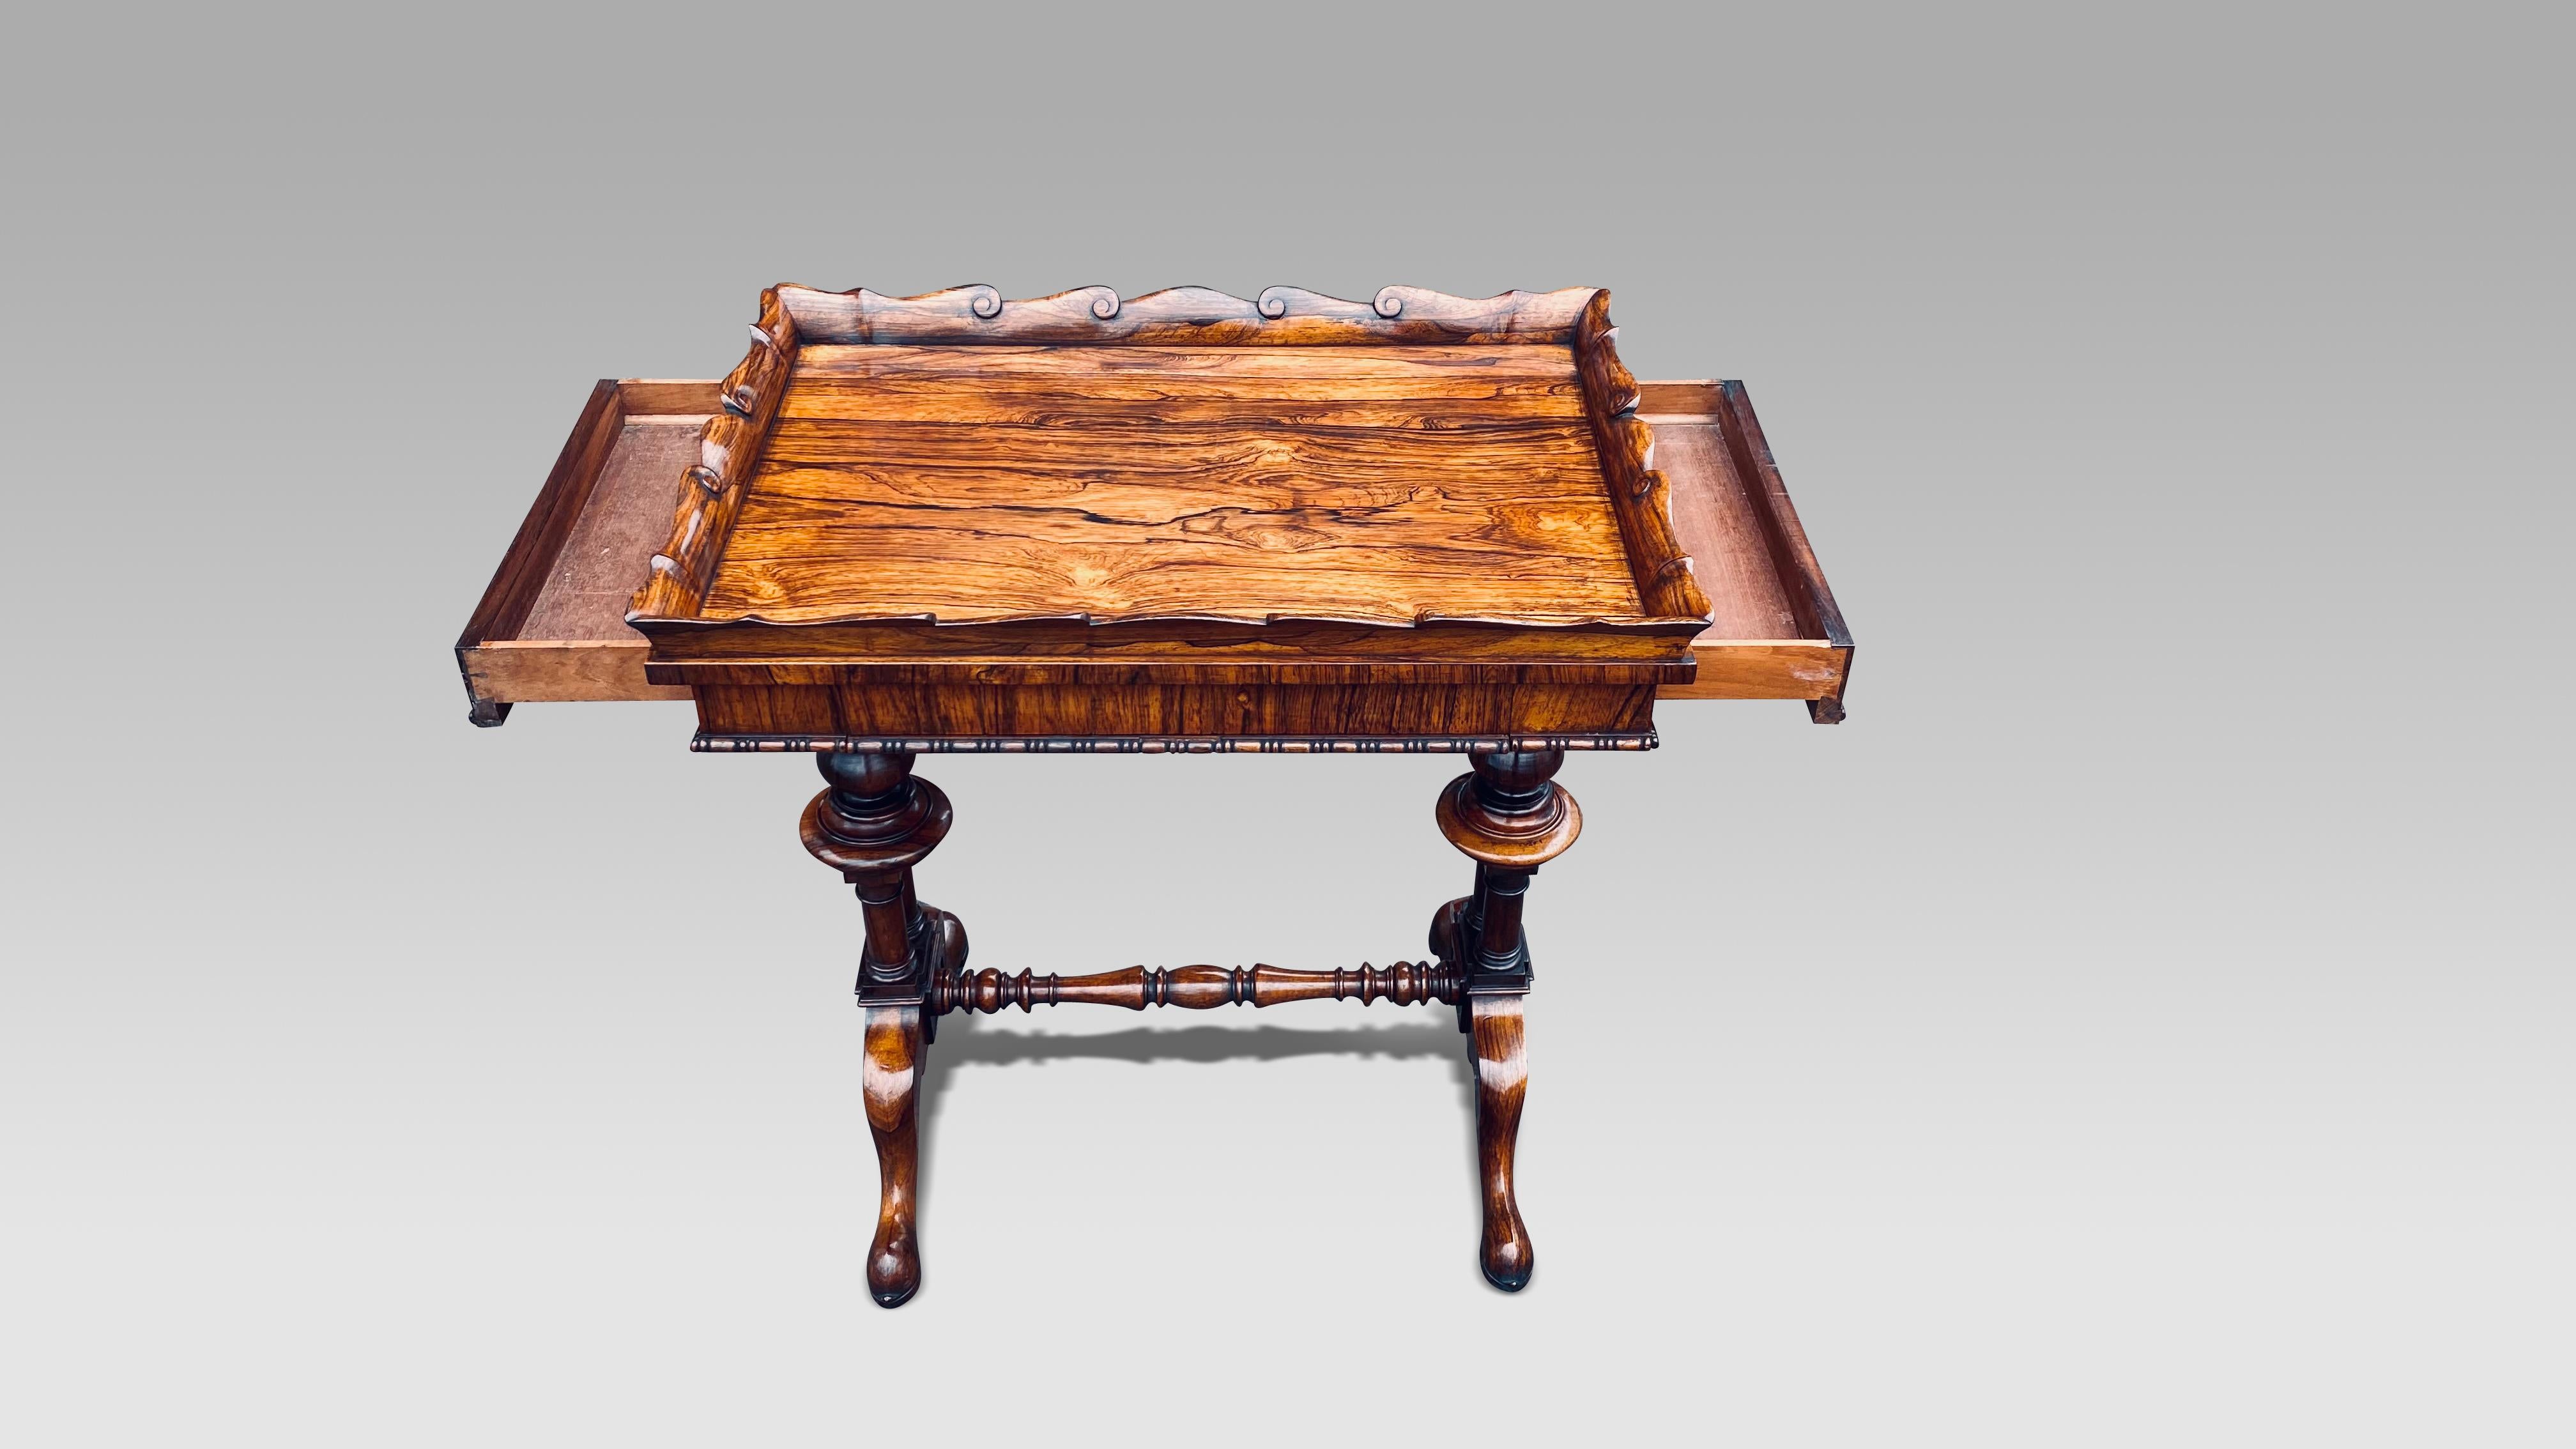 An early 19th century rosewood work table firmly attributed to Gillows.
The table consists of finely figured rosewood veneers with a solid rosewood scrolling carved tray top gallery.
The upper section with a discreet drawer at either end and a